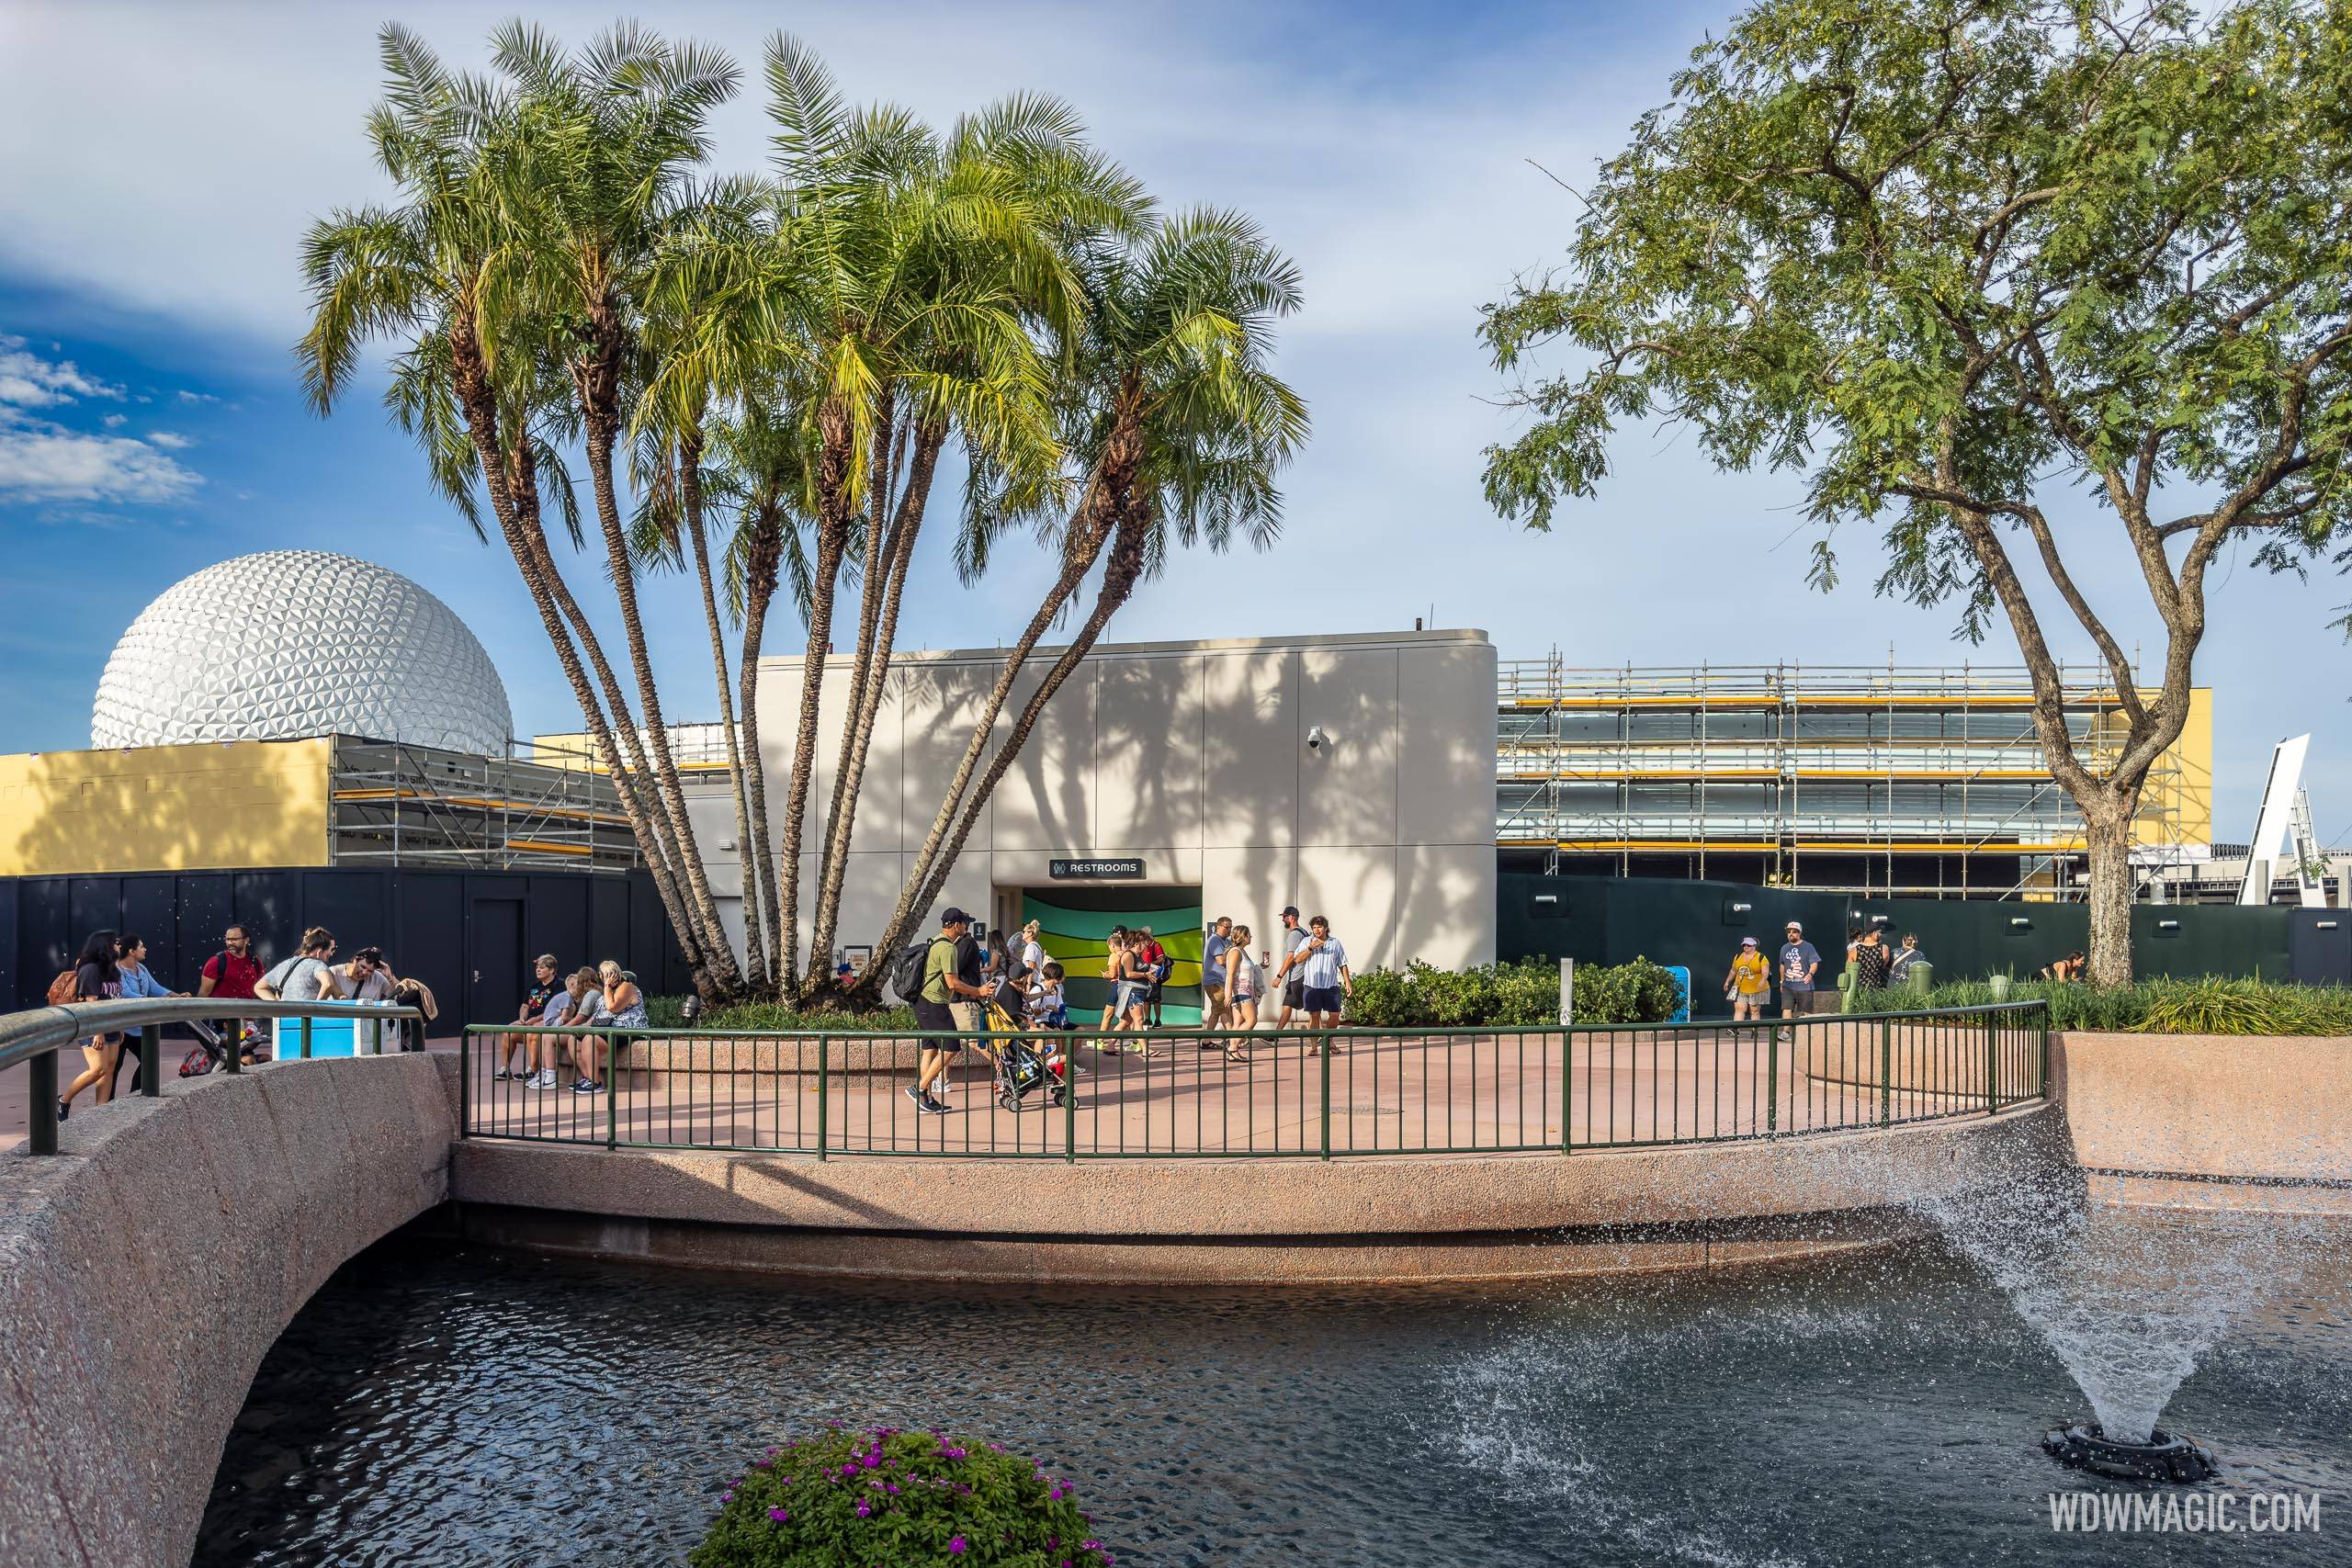 Walkway and restrooms reopen in EPCOT's World Nature